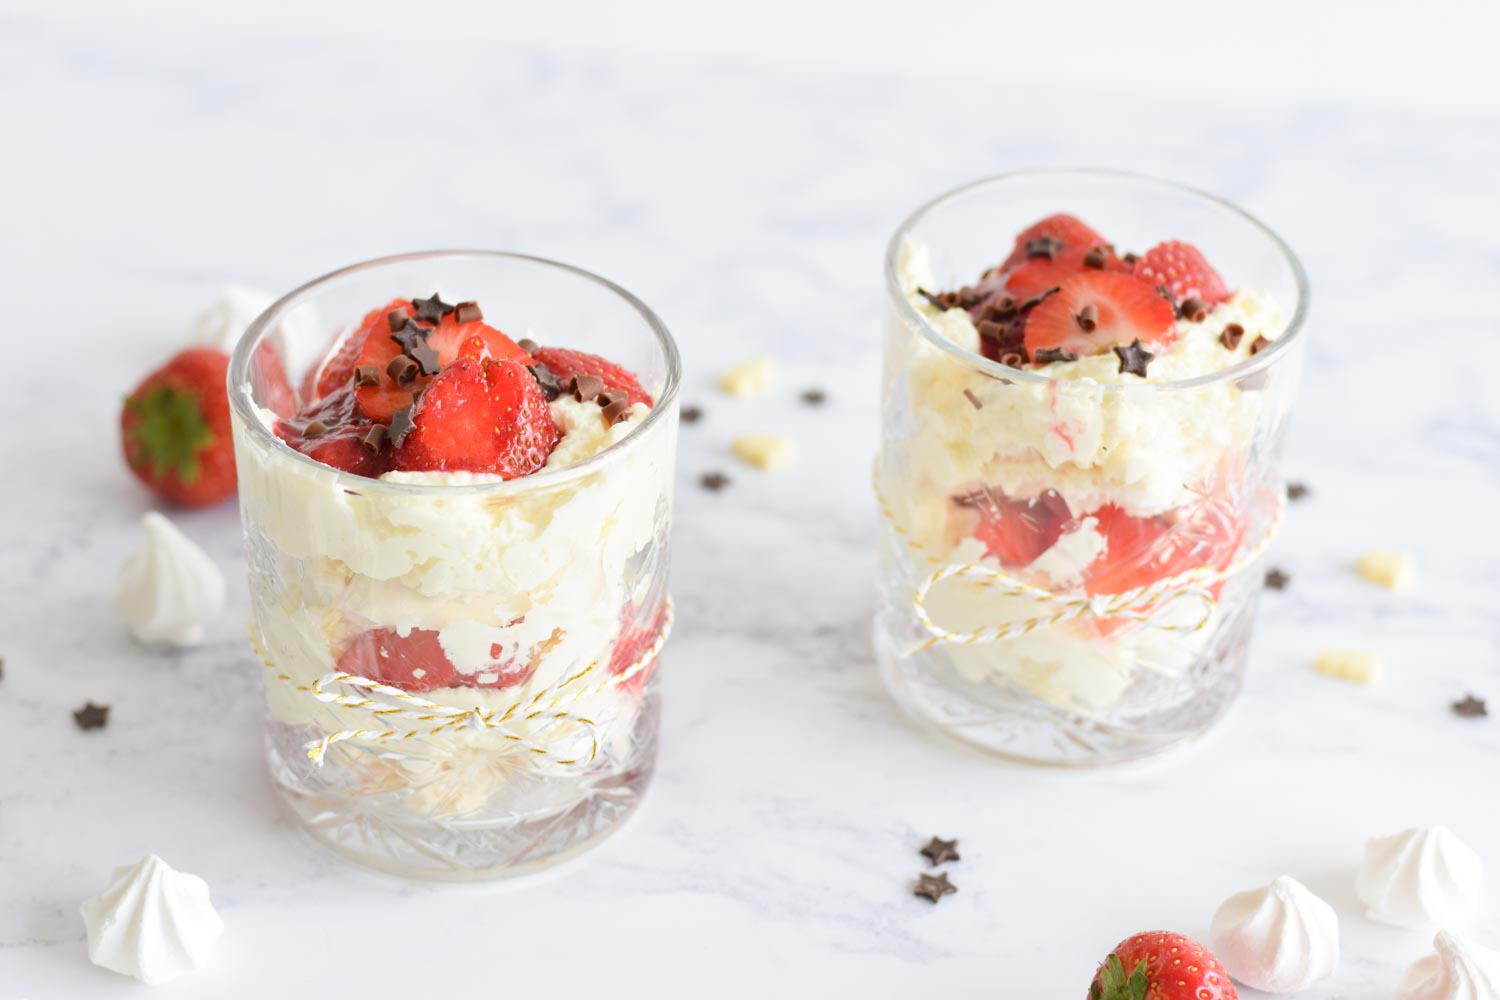 Two low FODMAP eton mess desserts in a glasses